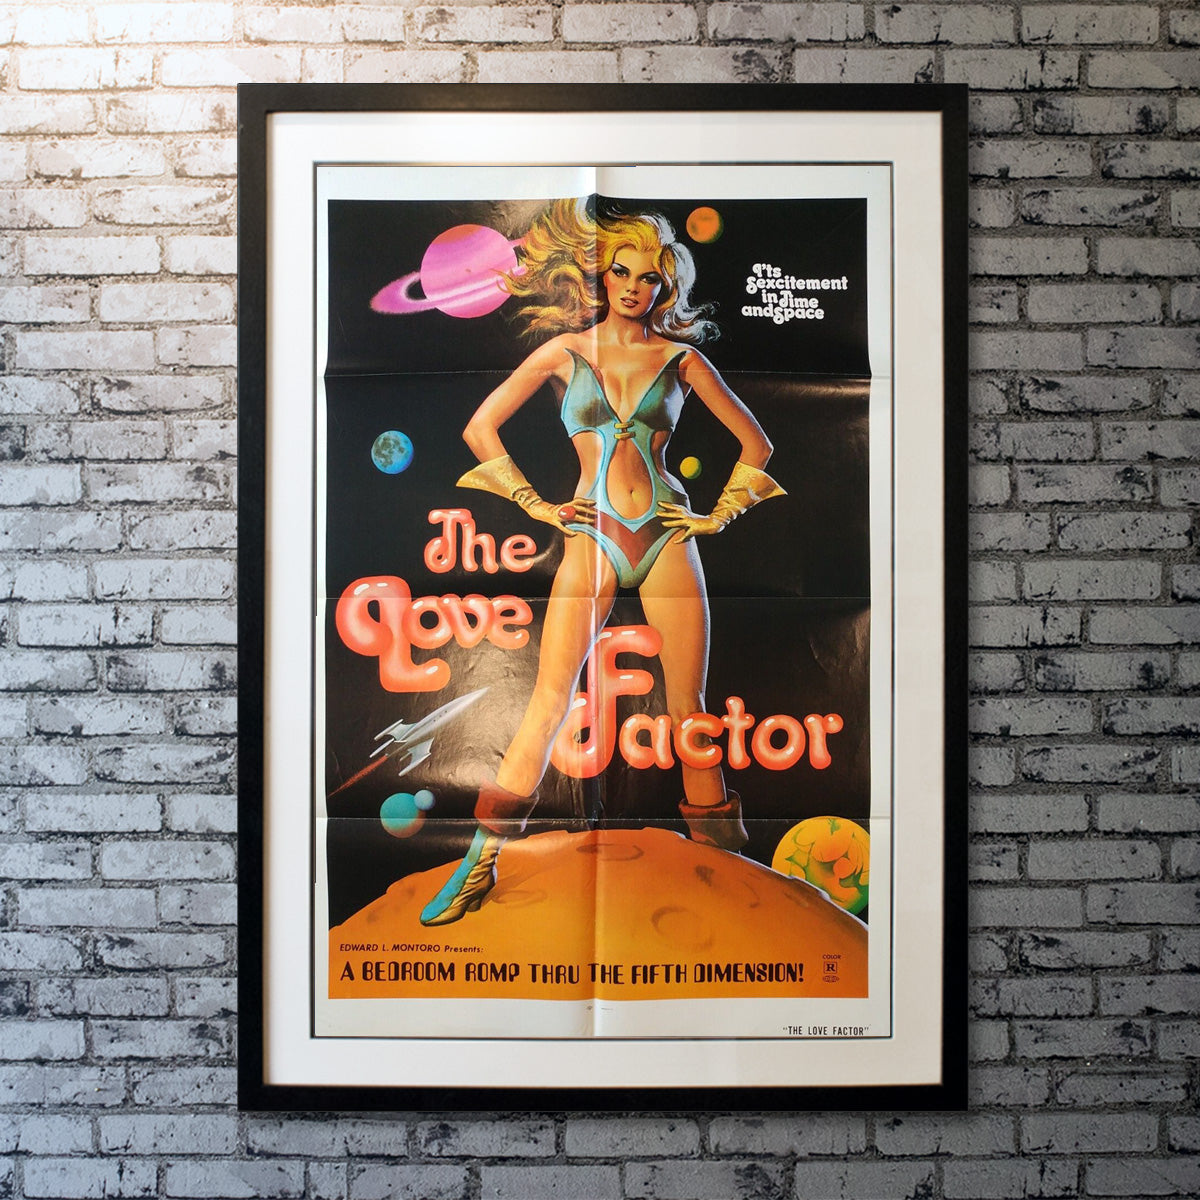 Love Factor, The (1969)